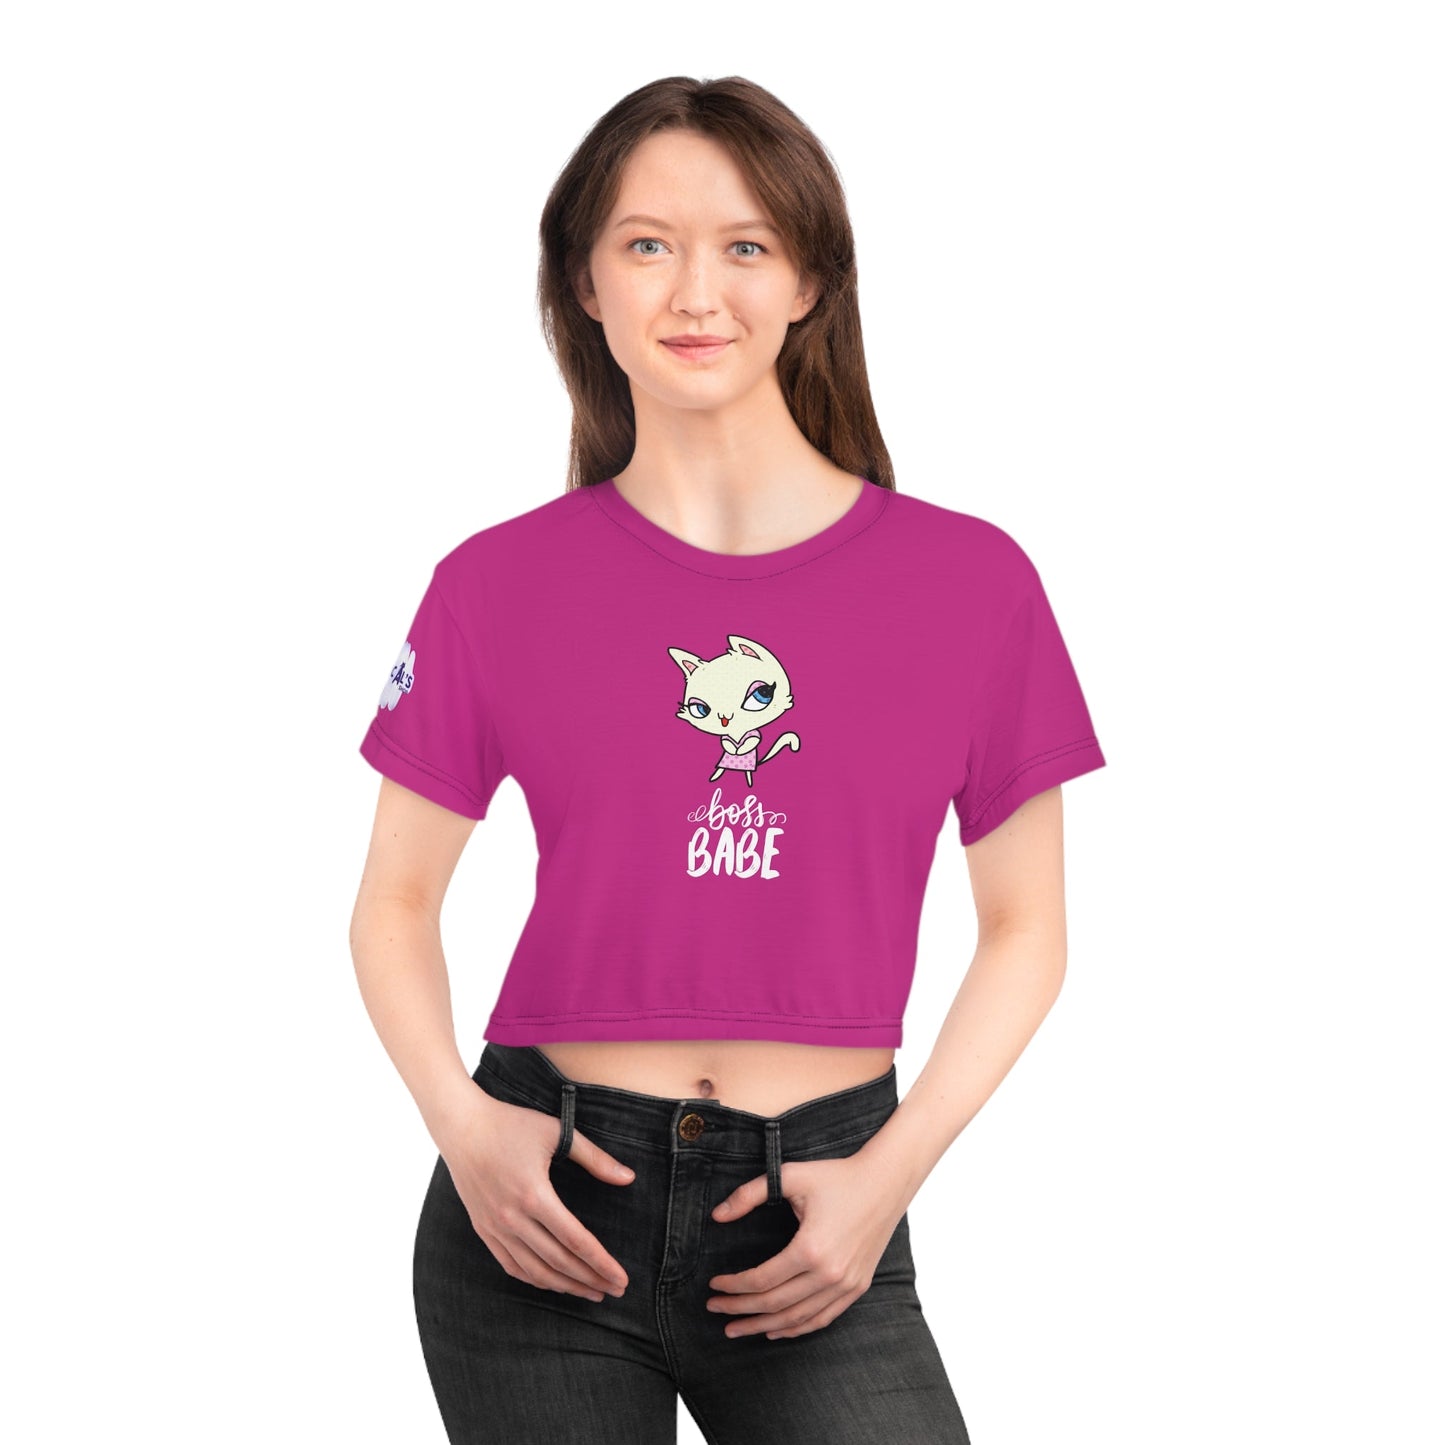 Boss Babe Pink Crop Tee - All Over Prints - Epileptic Al’s Shop